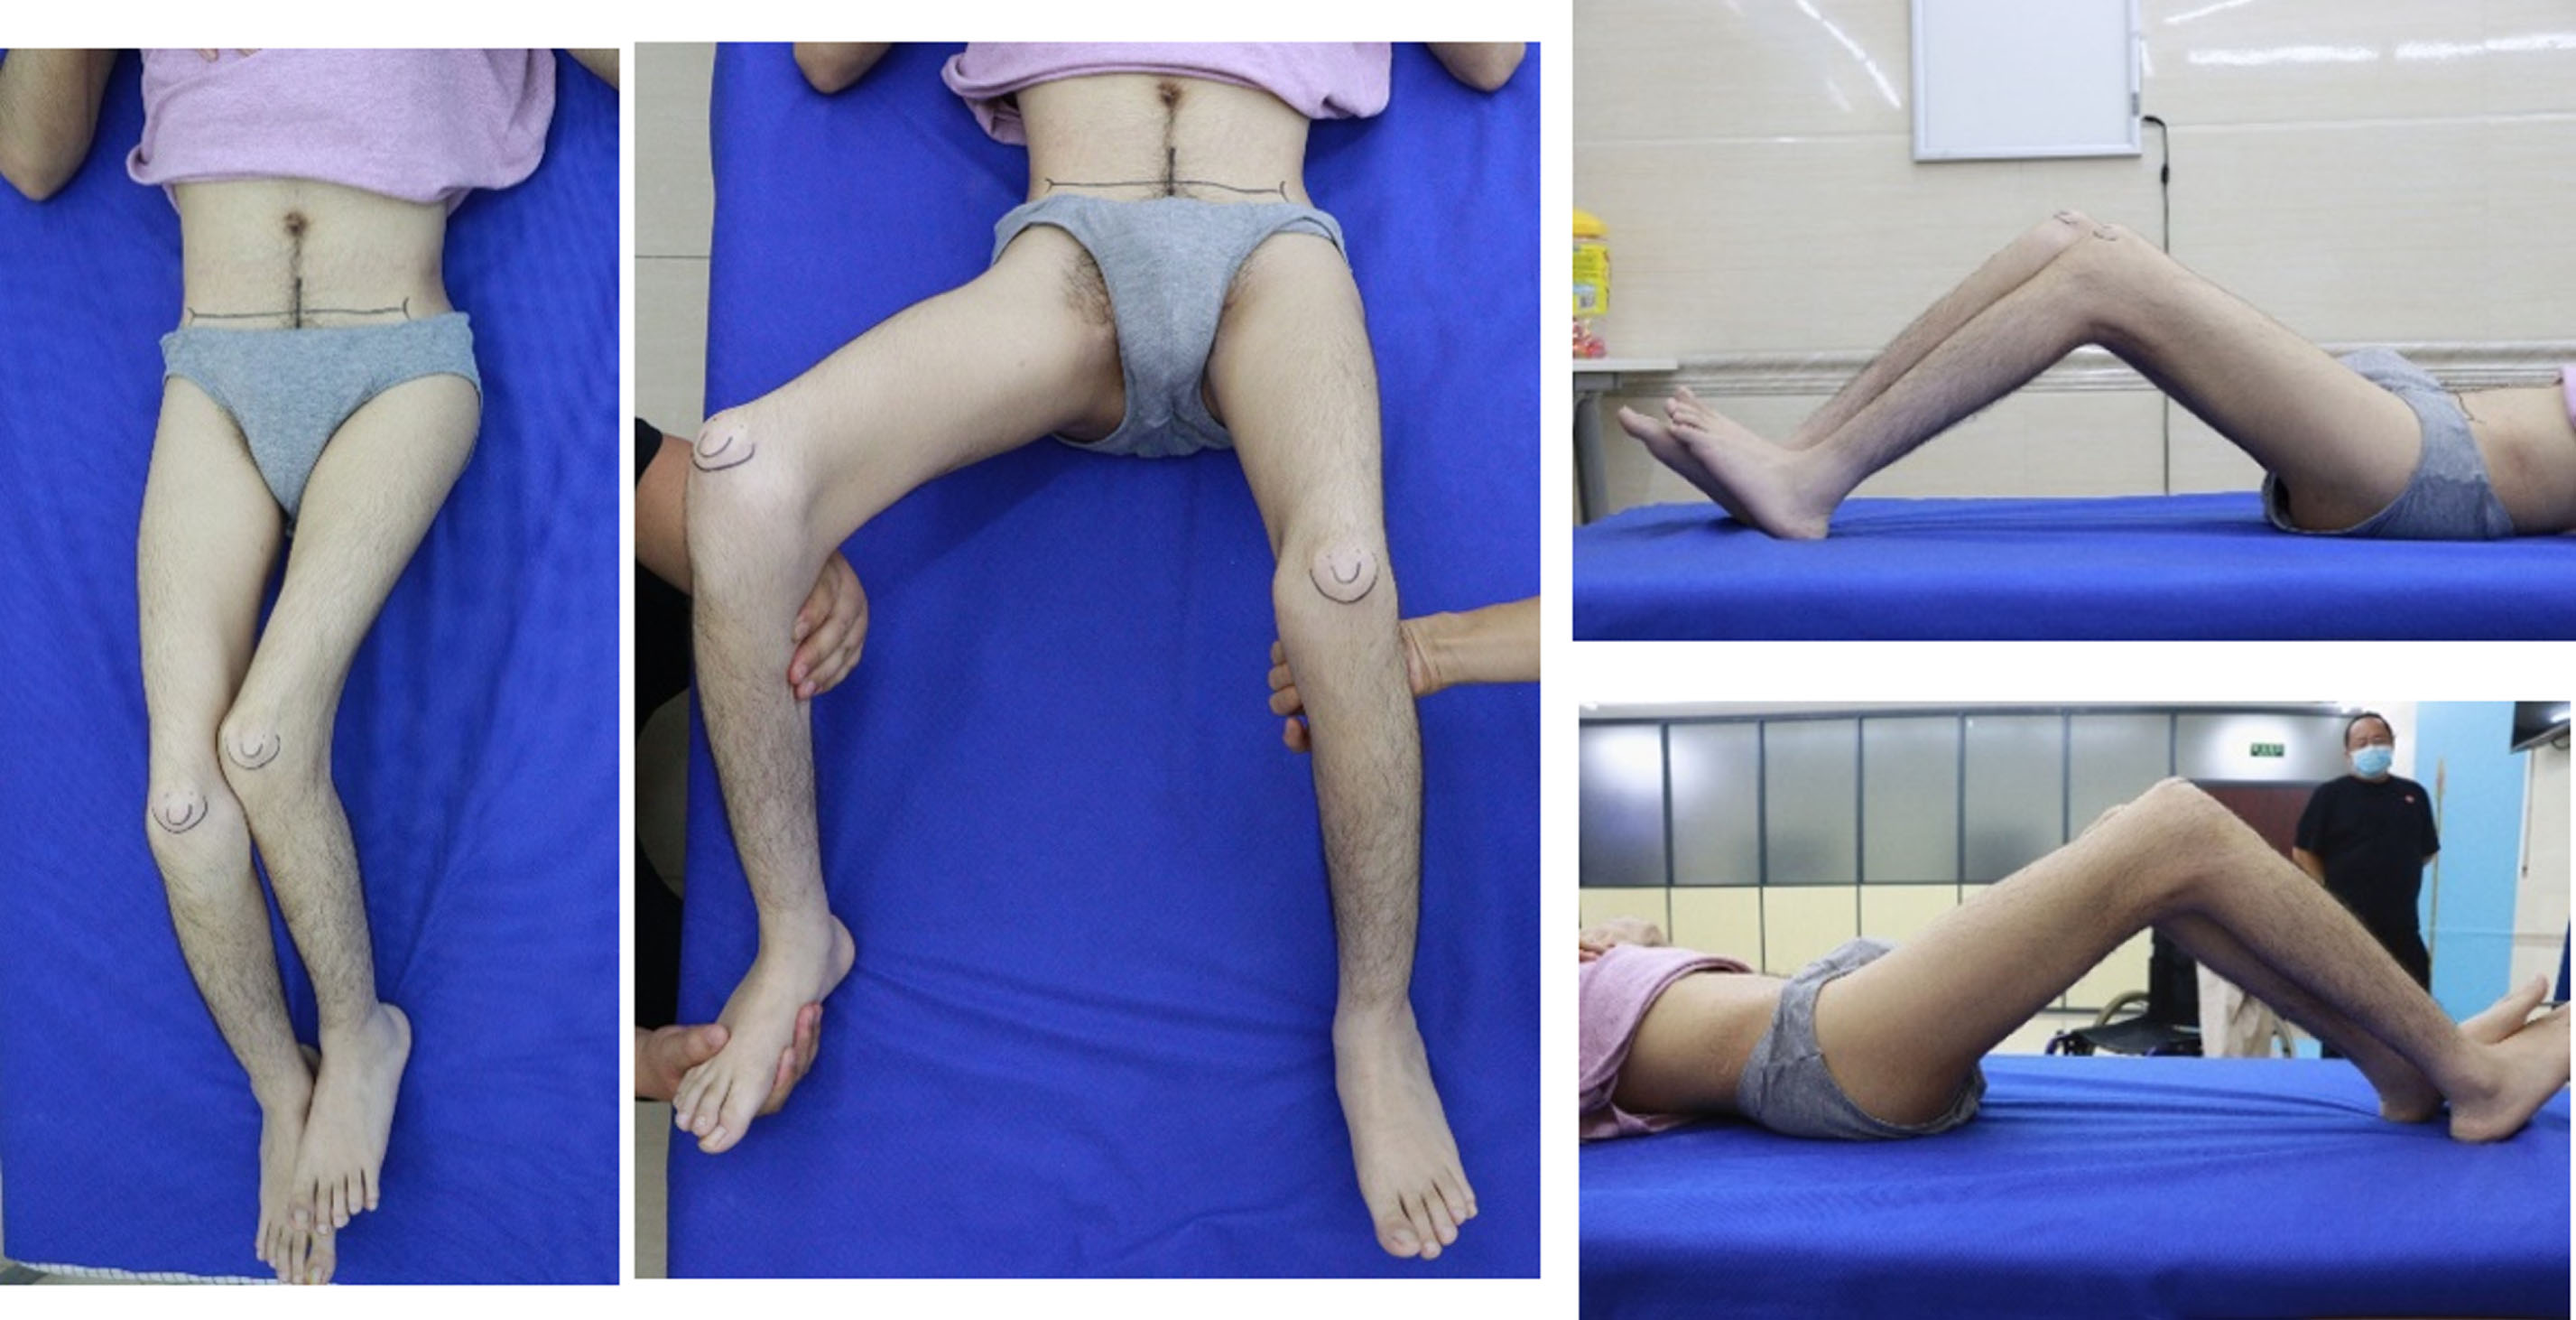 A physical exam revealed a fixed adduction shortening of the left thigh segment, bilateral knee flexion contractures, bilateral hip flexion contractures, and patella alta.